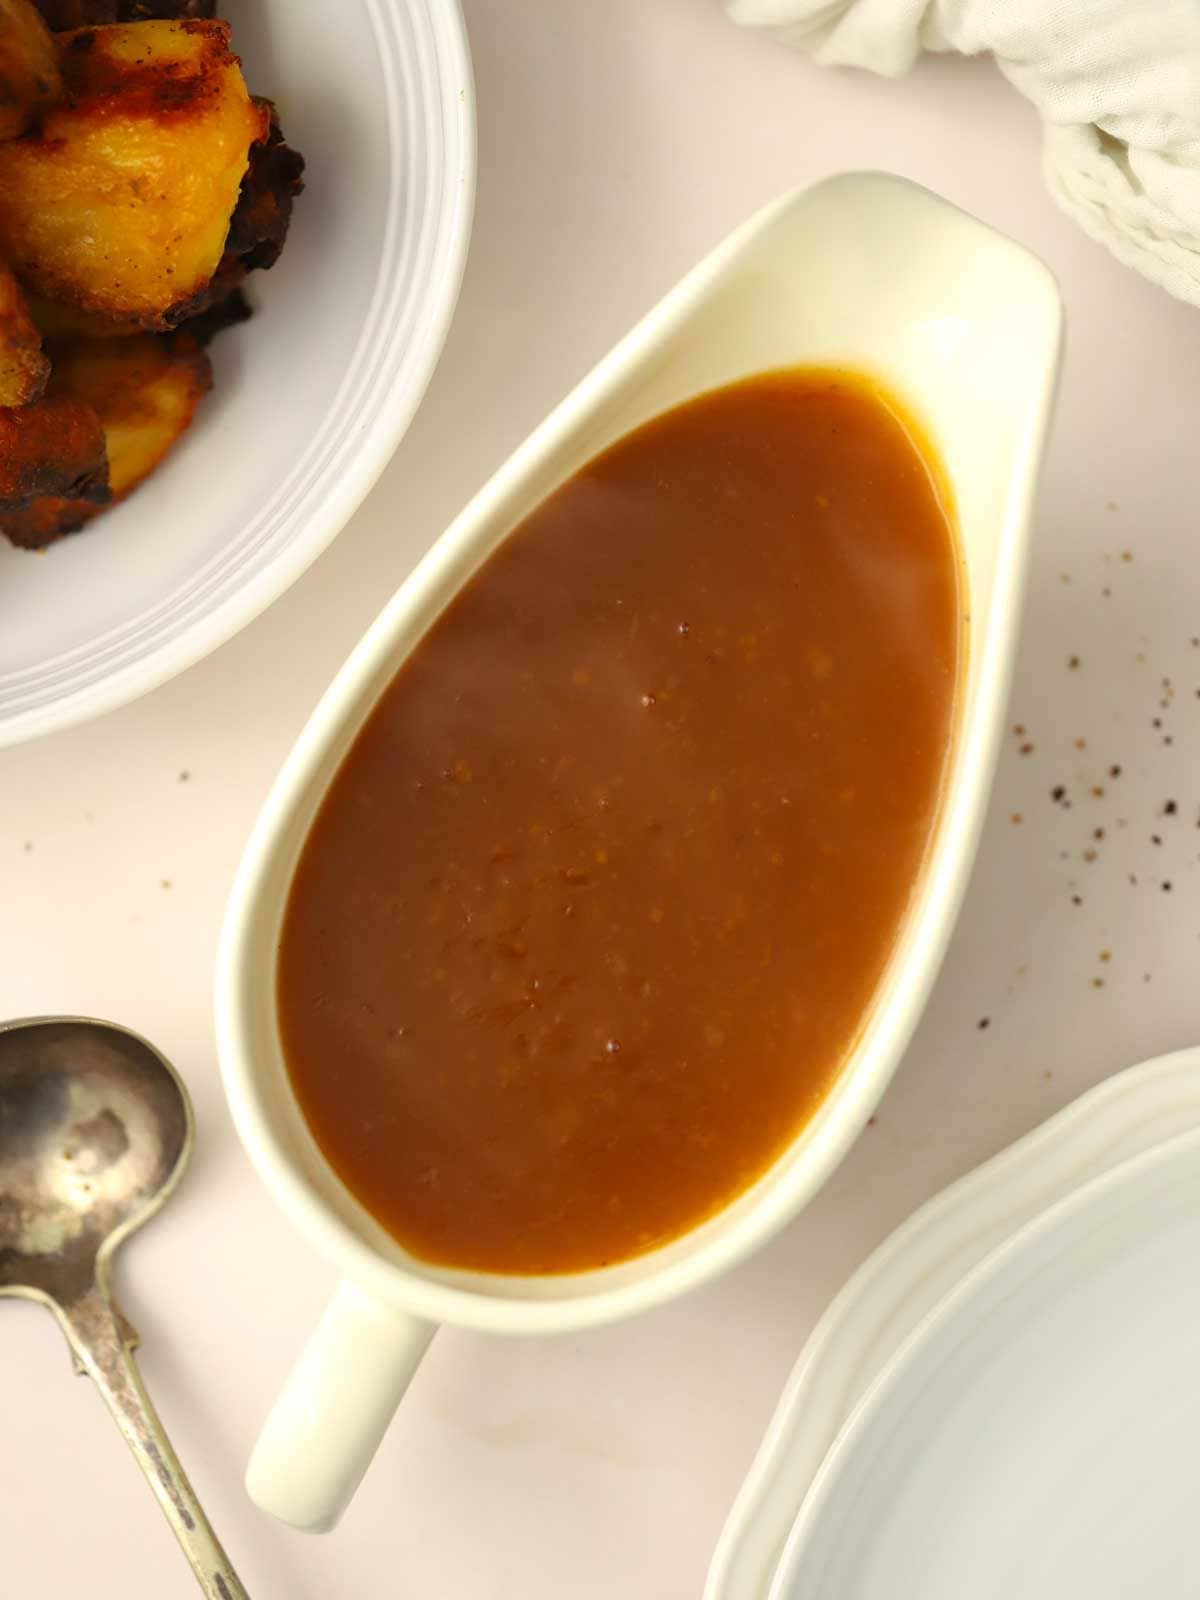 A bird's eye view of a gravy boat filled with thick vegetarian gravy, with roast potatoes just inside the image.